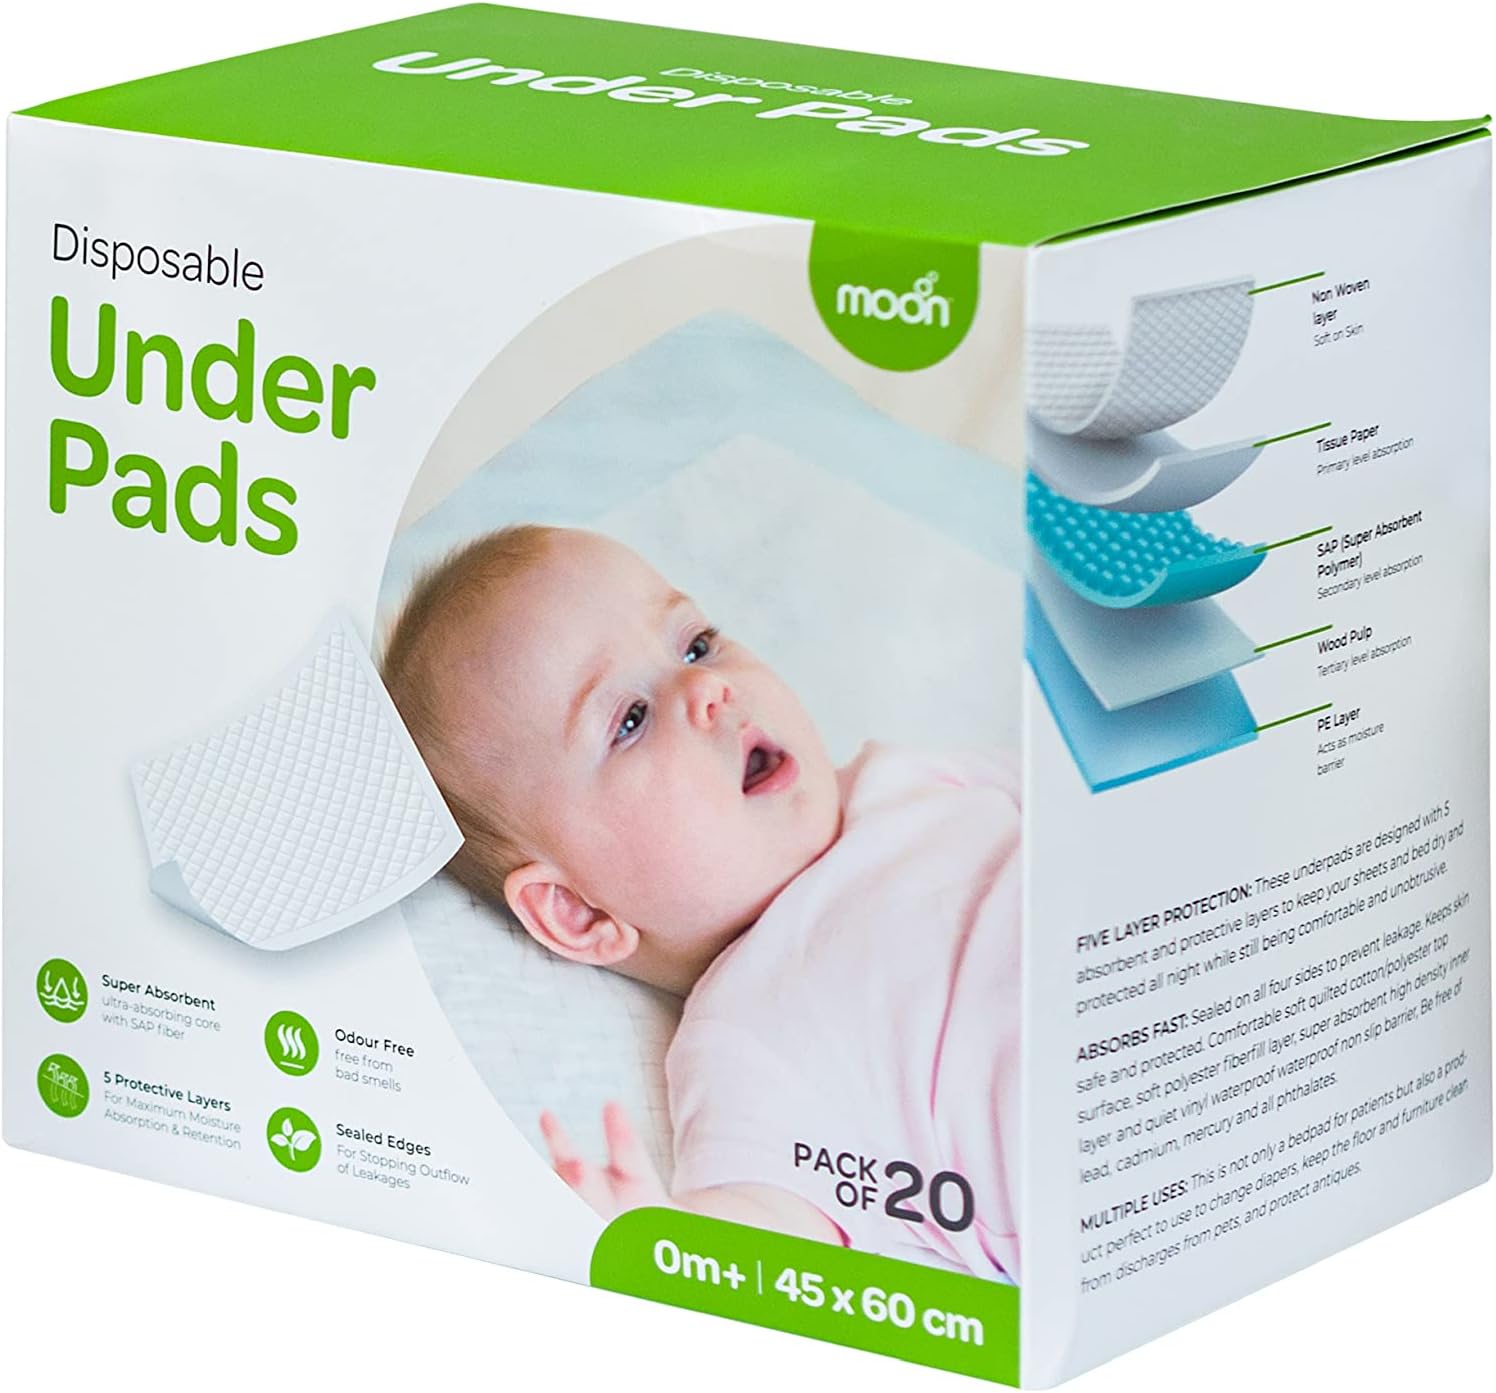 MOON Disposable Under Pads. Highly Absorbent, Odour-Free Ultrasoft Non-Woven Top Sheet, Multi-Use, Leak-Proof Bed Pads for Adults and Kids, Unisex, Size 45cm x 60cm - Pack Of 20